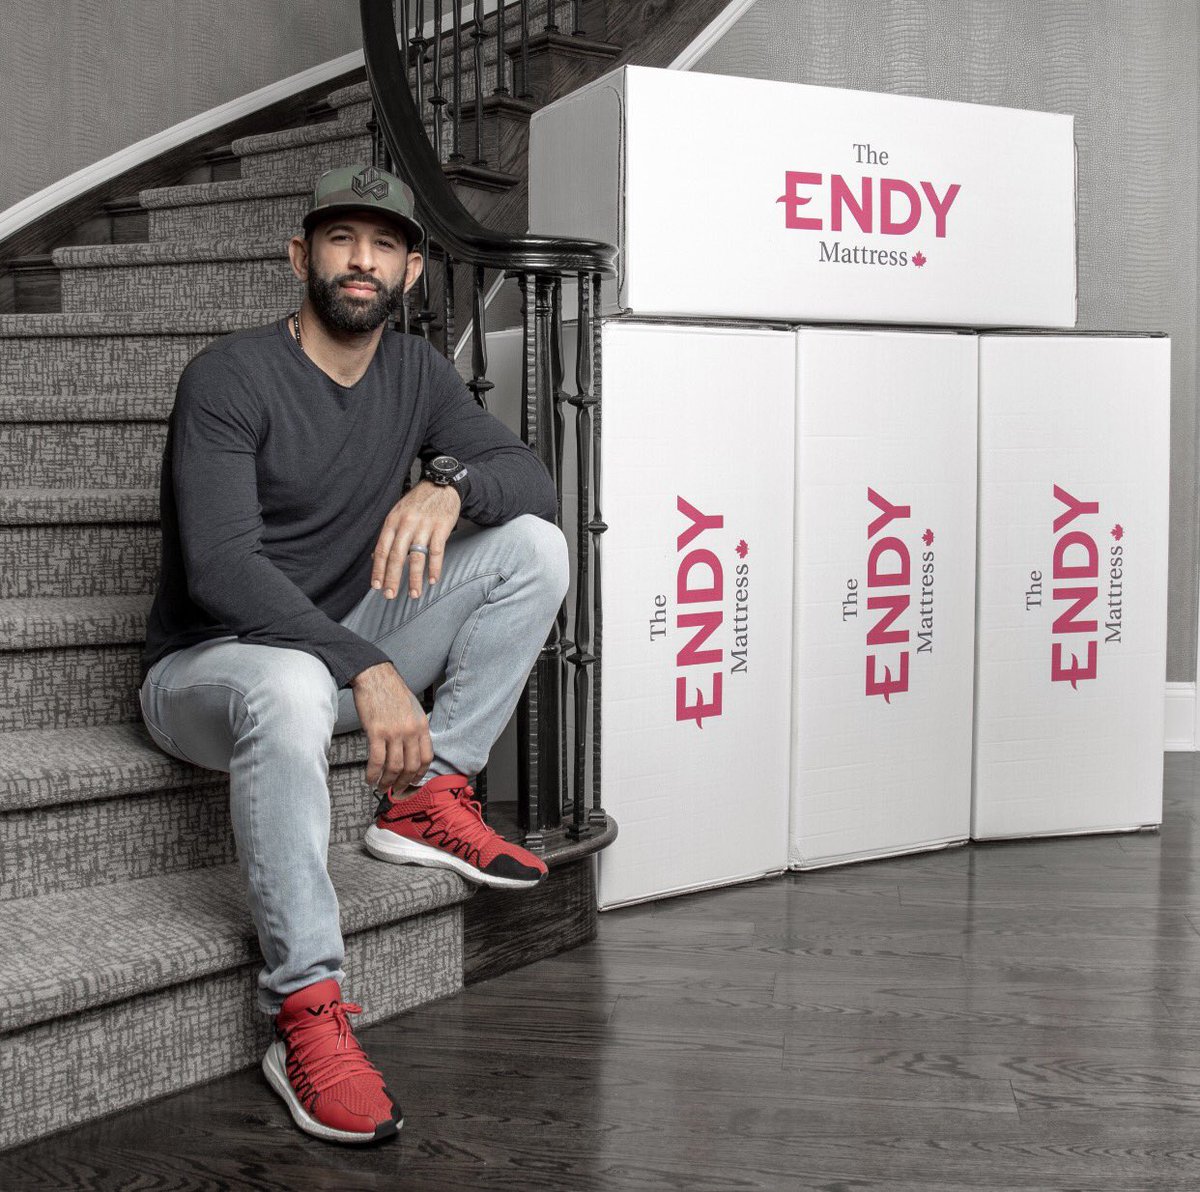 As an investor, I’m proud to team up with @EndySleep , a company whose values I share: innovation, well-being, and paying it forward. Shoot me an email at jose@endy.com to learn more.